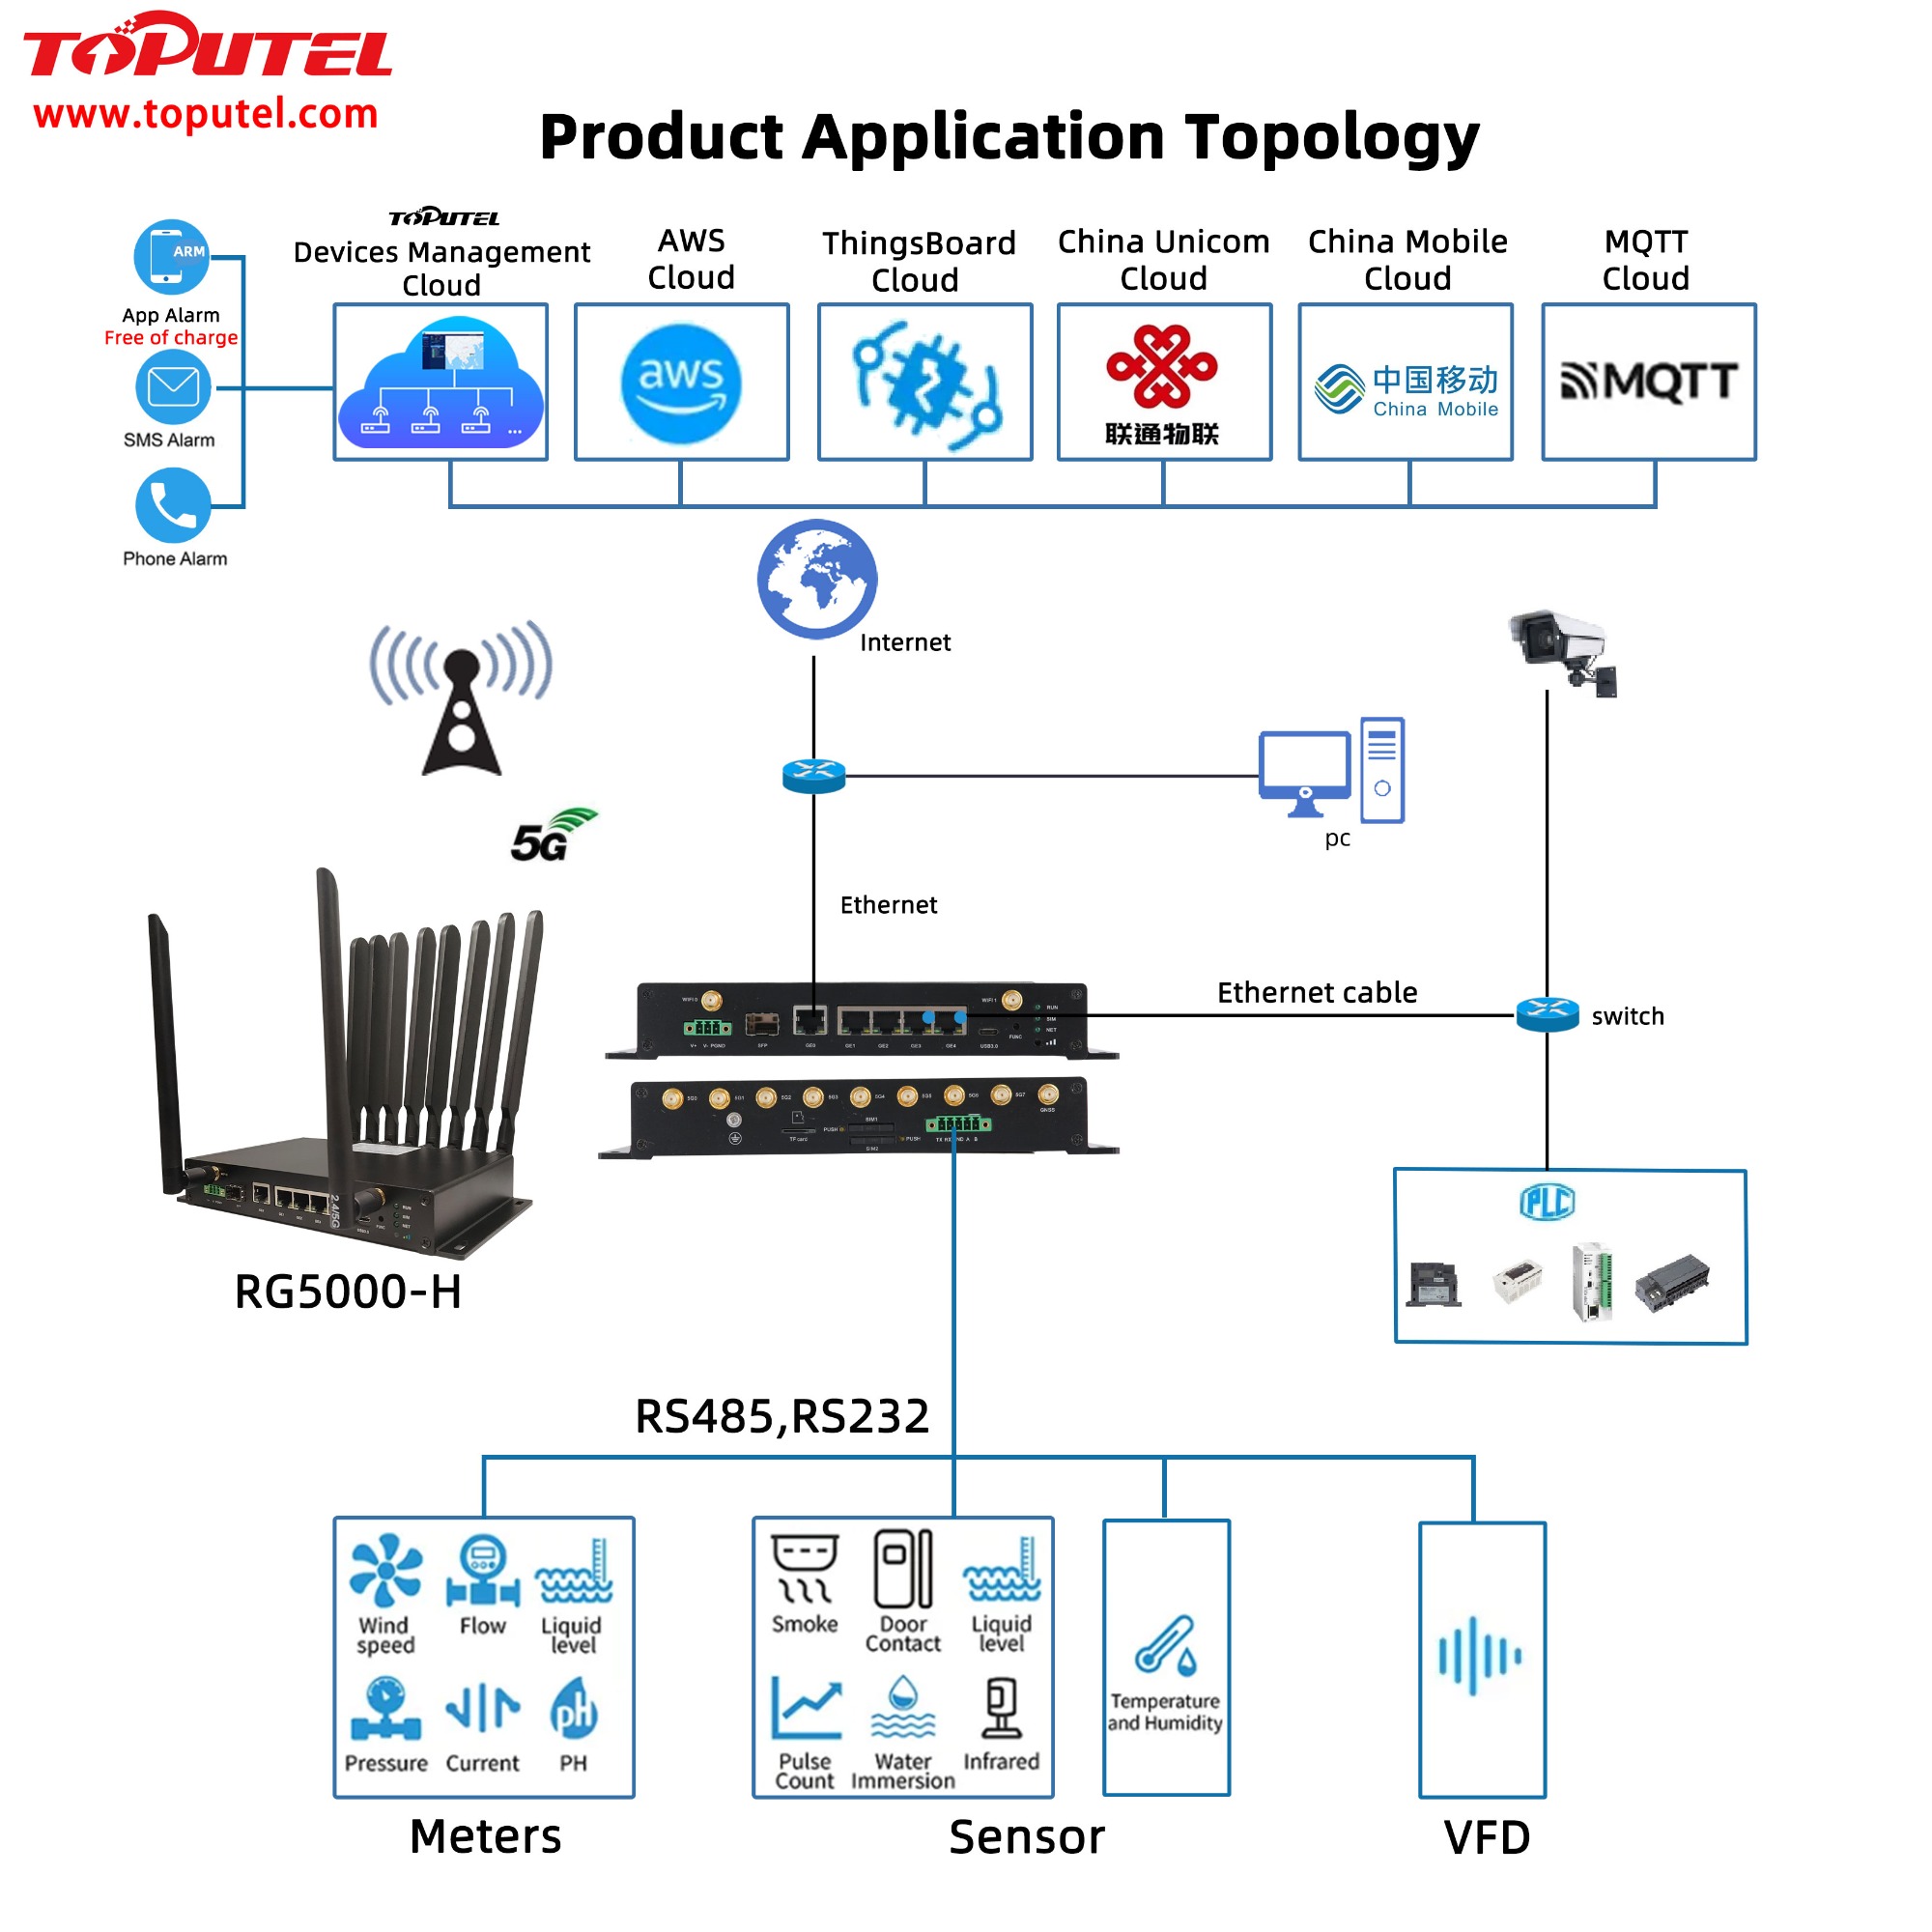 5G Industrial Router RG5000-H  product application topology diagram